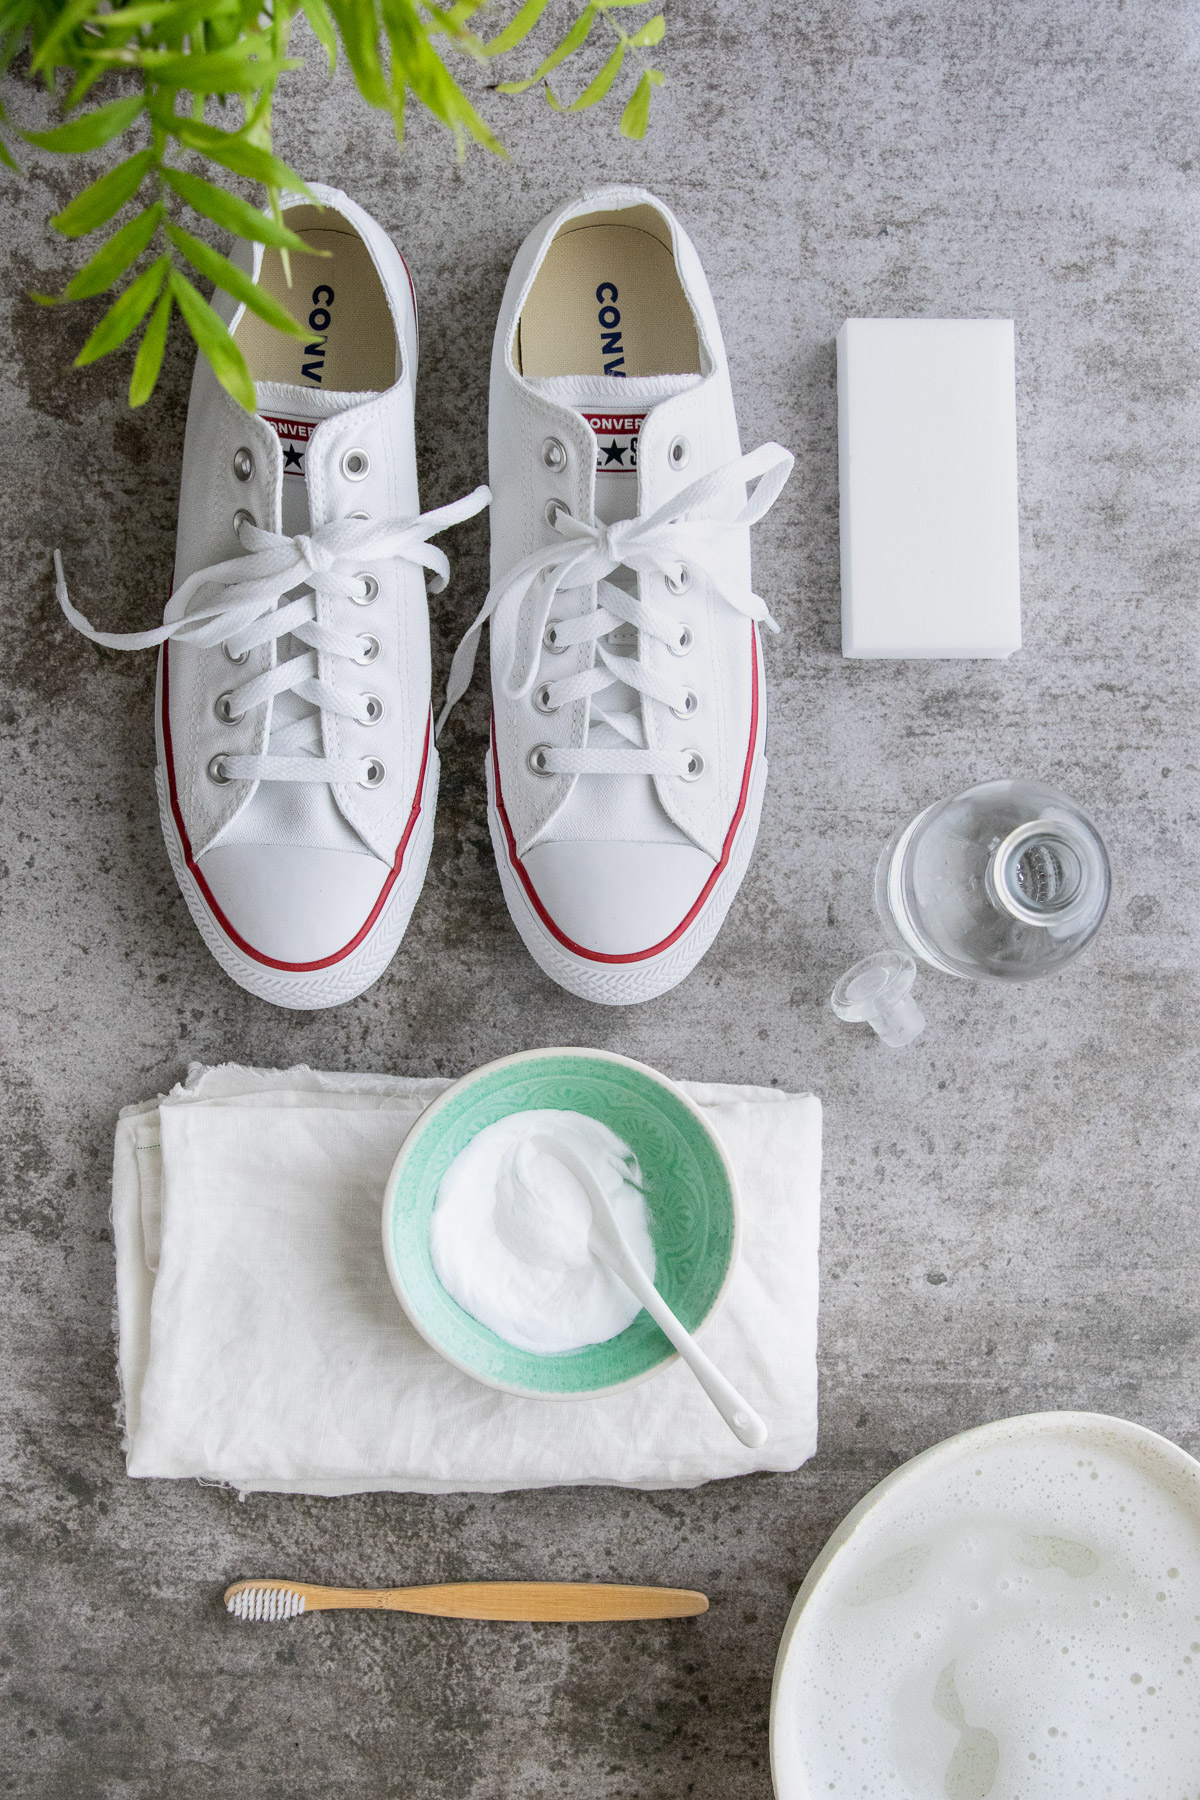 Supplies you'll need to clean converse sneakers